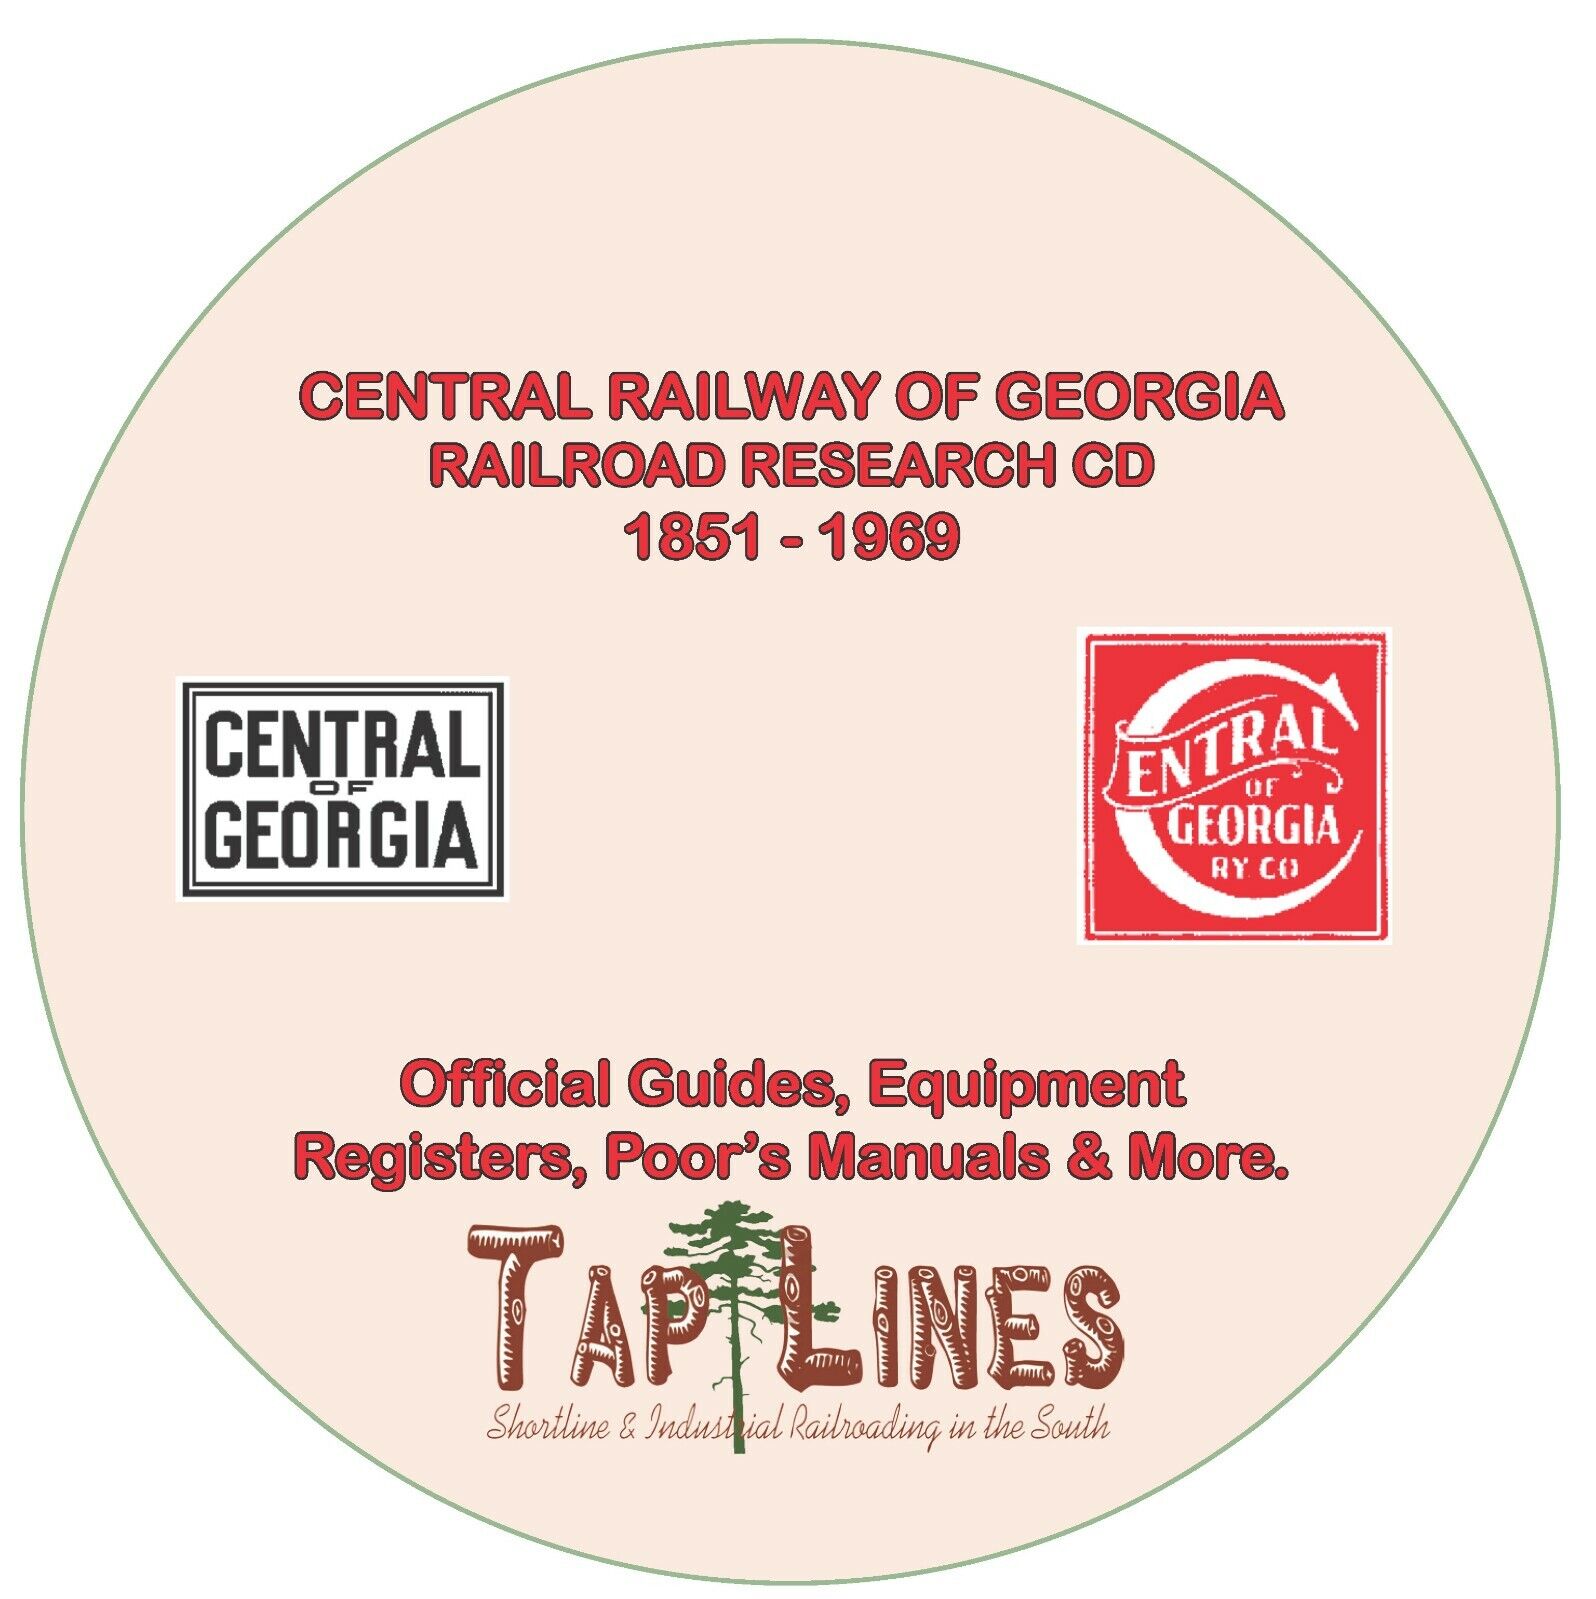 CENTRAL OF GEORGIA - OFFICIAL GUIDES, EQUIPMENT REGISTERS & RESEARCH ON DVD ROM